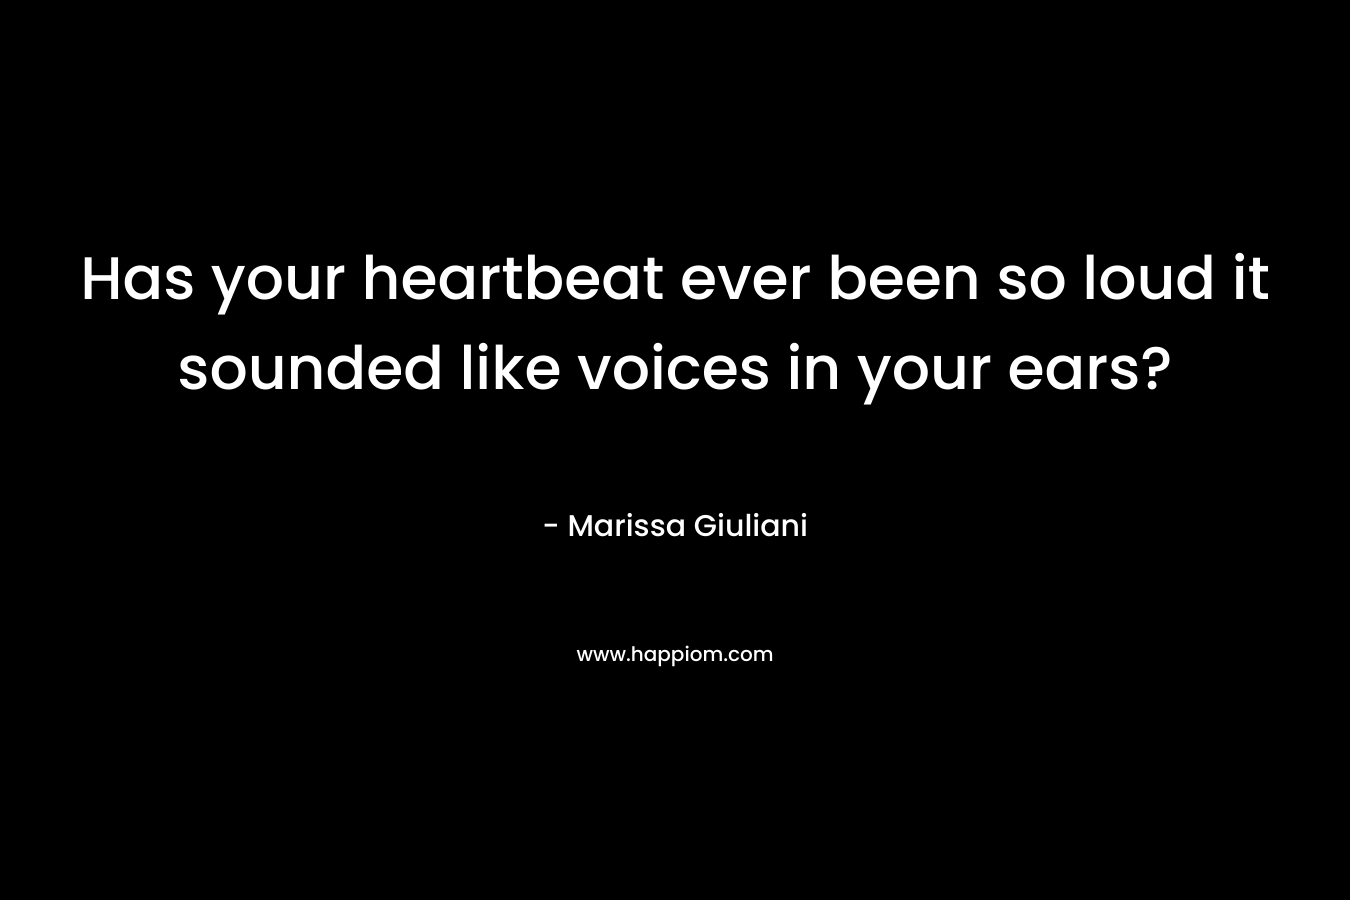 Has your heartbeat ever been so loud it sounded like voices in your ears?